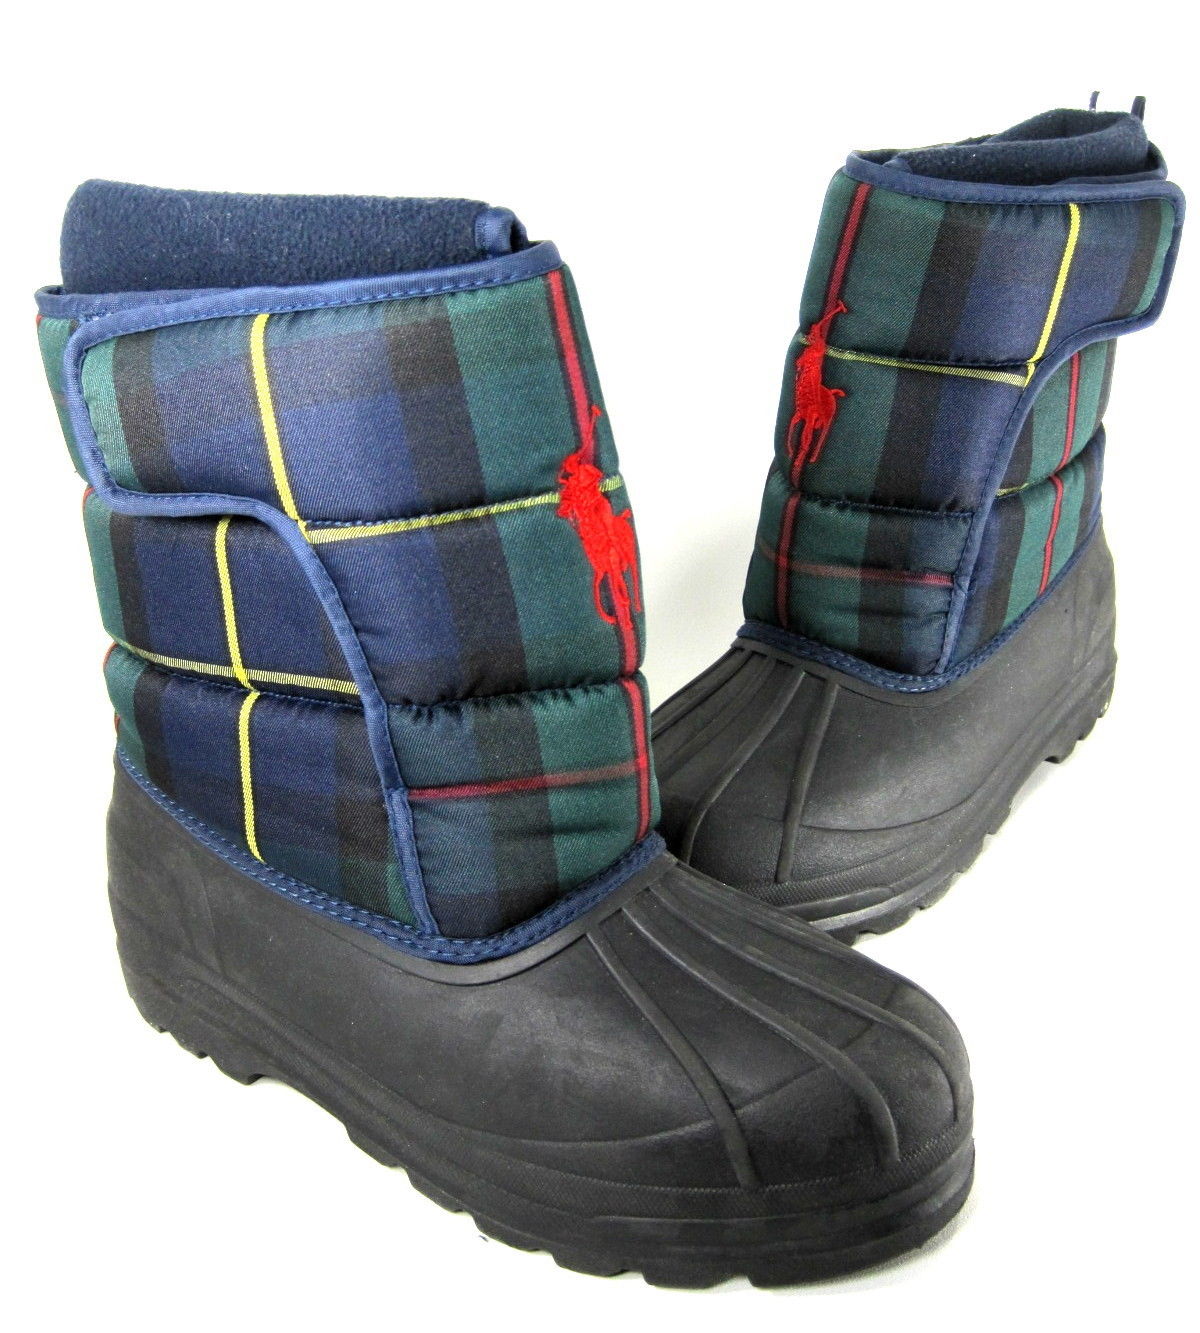 polo snow boots for toddlers